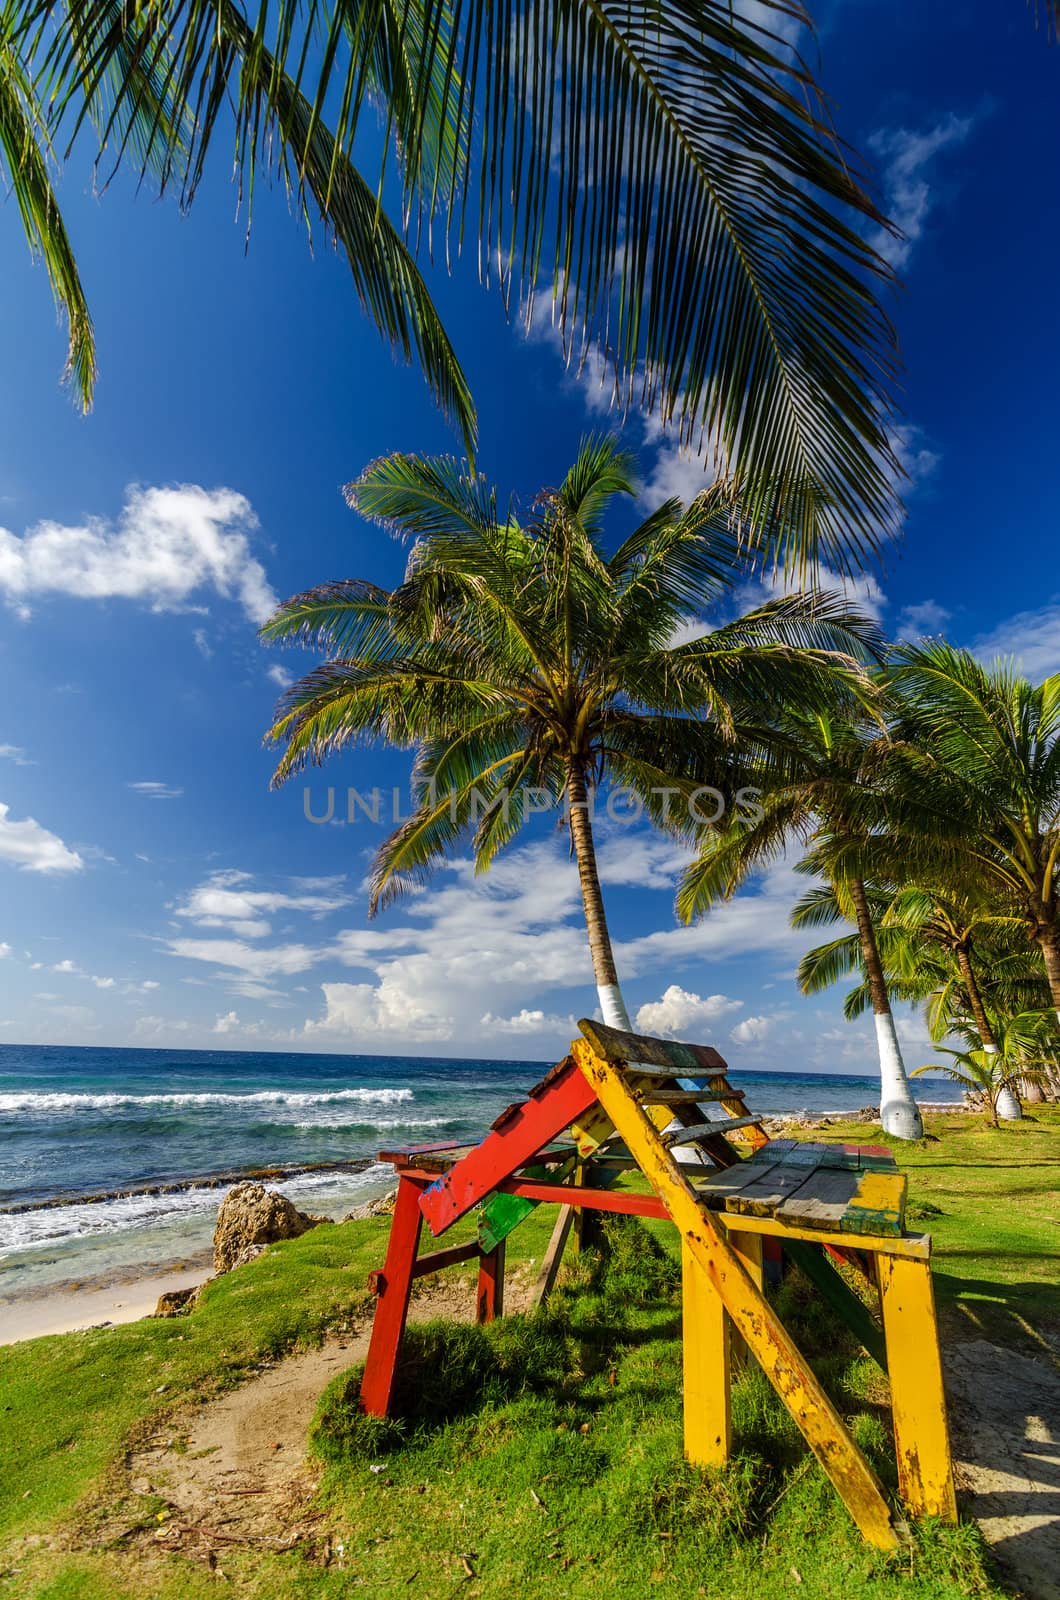 A colorful bench and palm trees in San Andres, Colombia